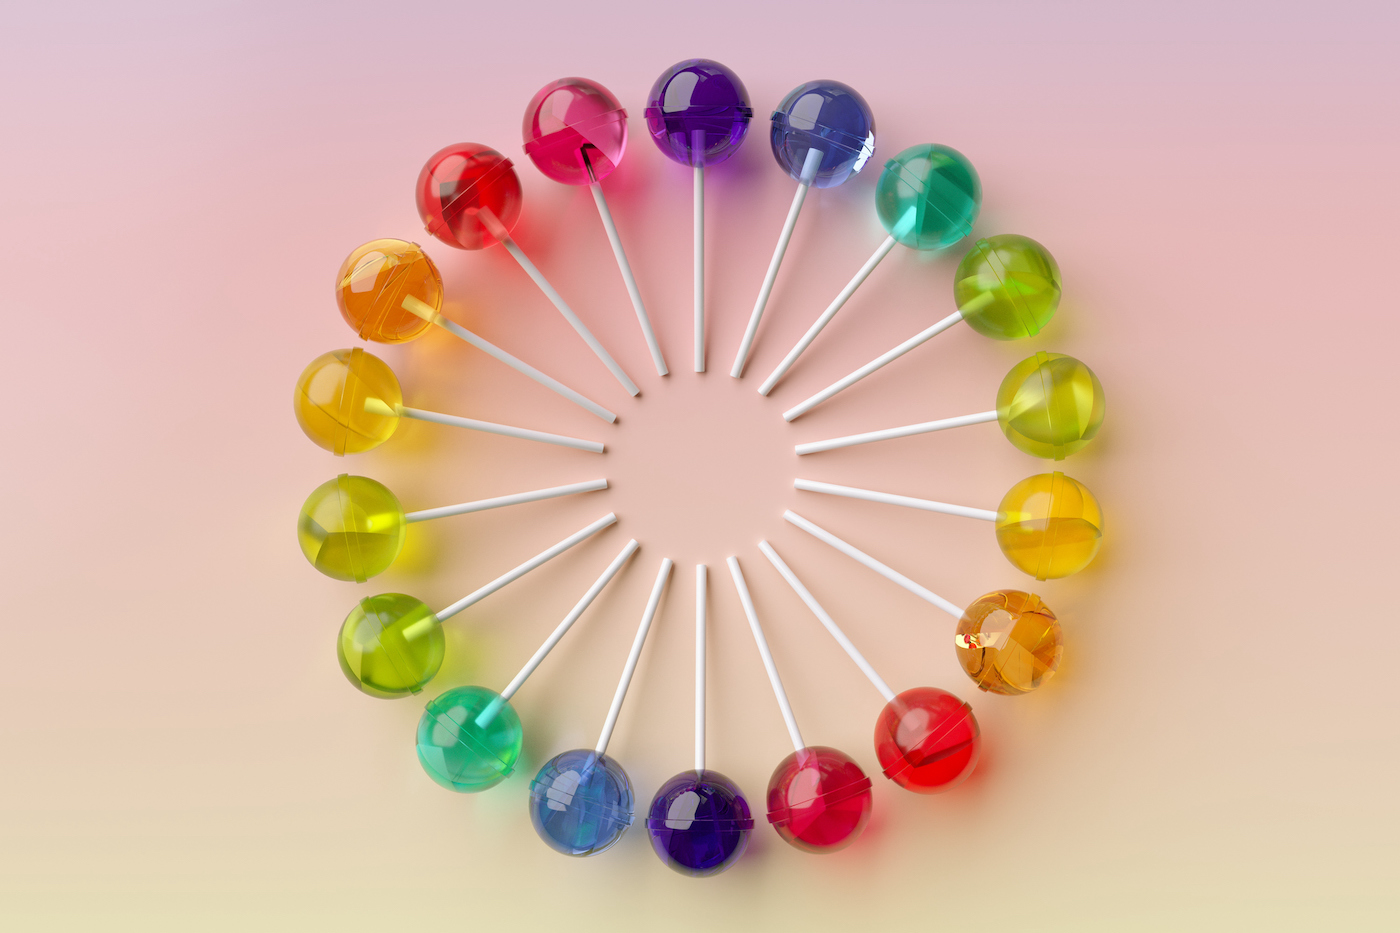 Digitally generated image of many lollipops organized in circular patterns on a pink surface.